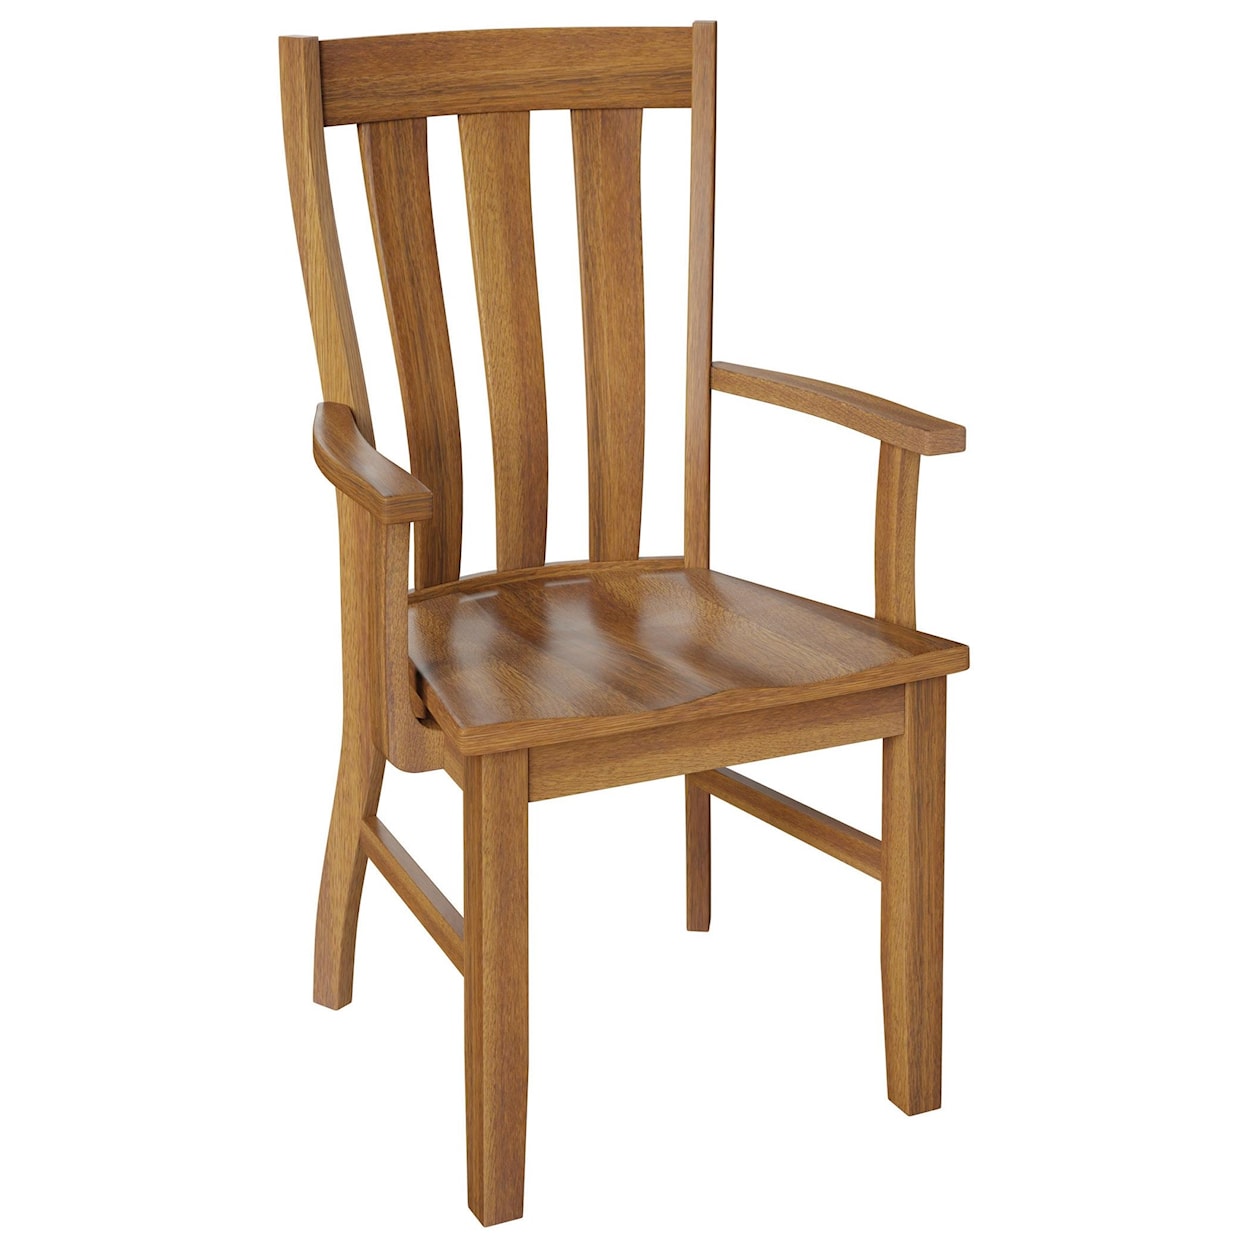 Wengerd Wood Products Medford Arm Chair